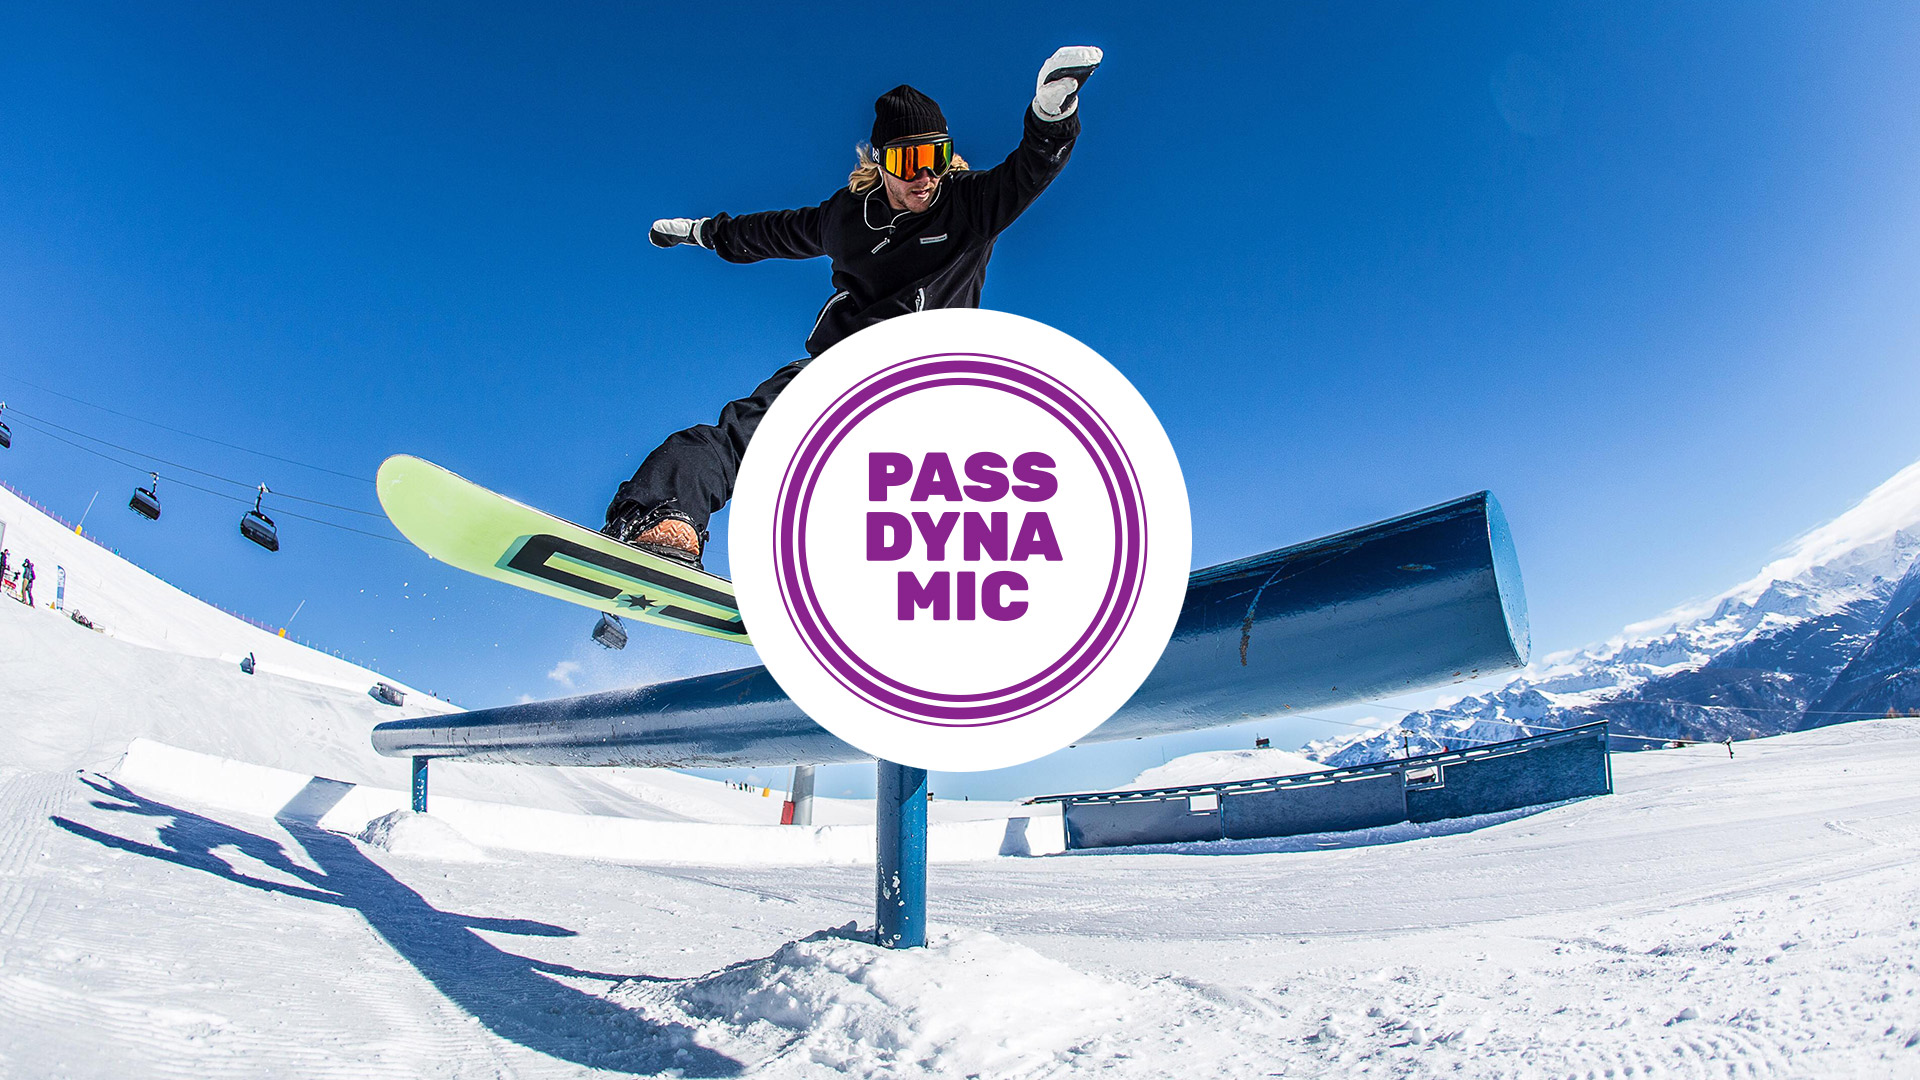 Buy your ski pass from 1 to 15 days or a long term pass